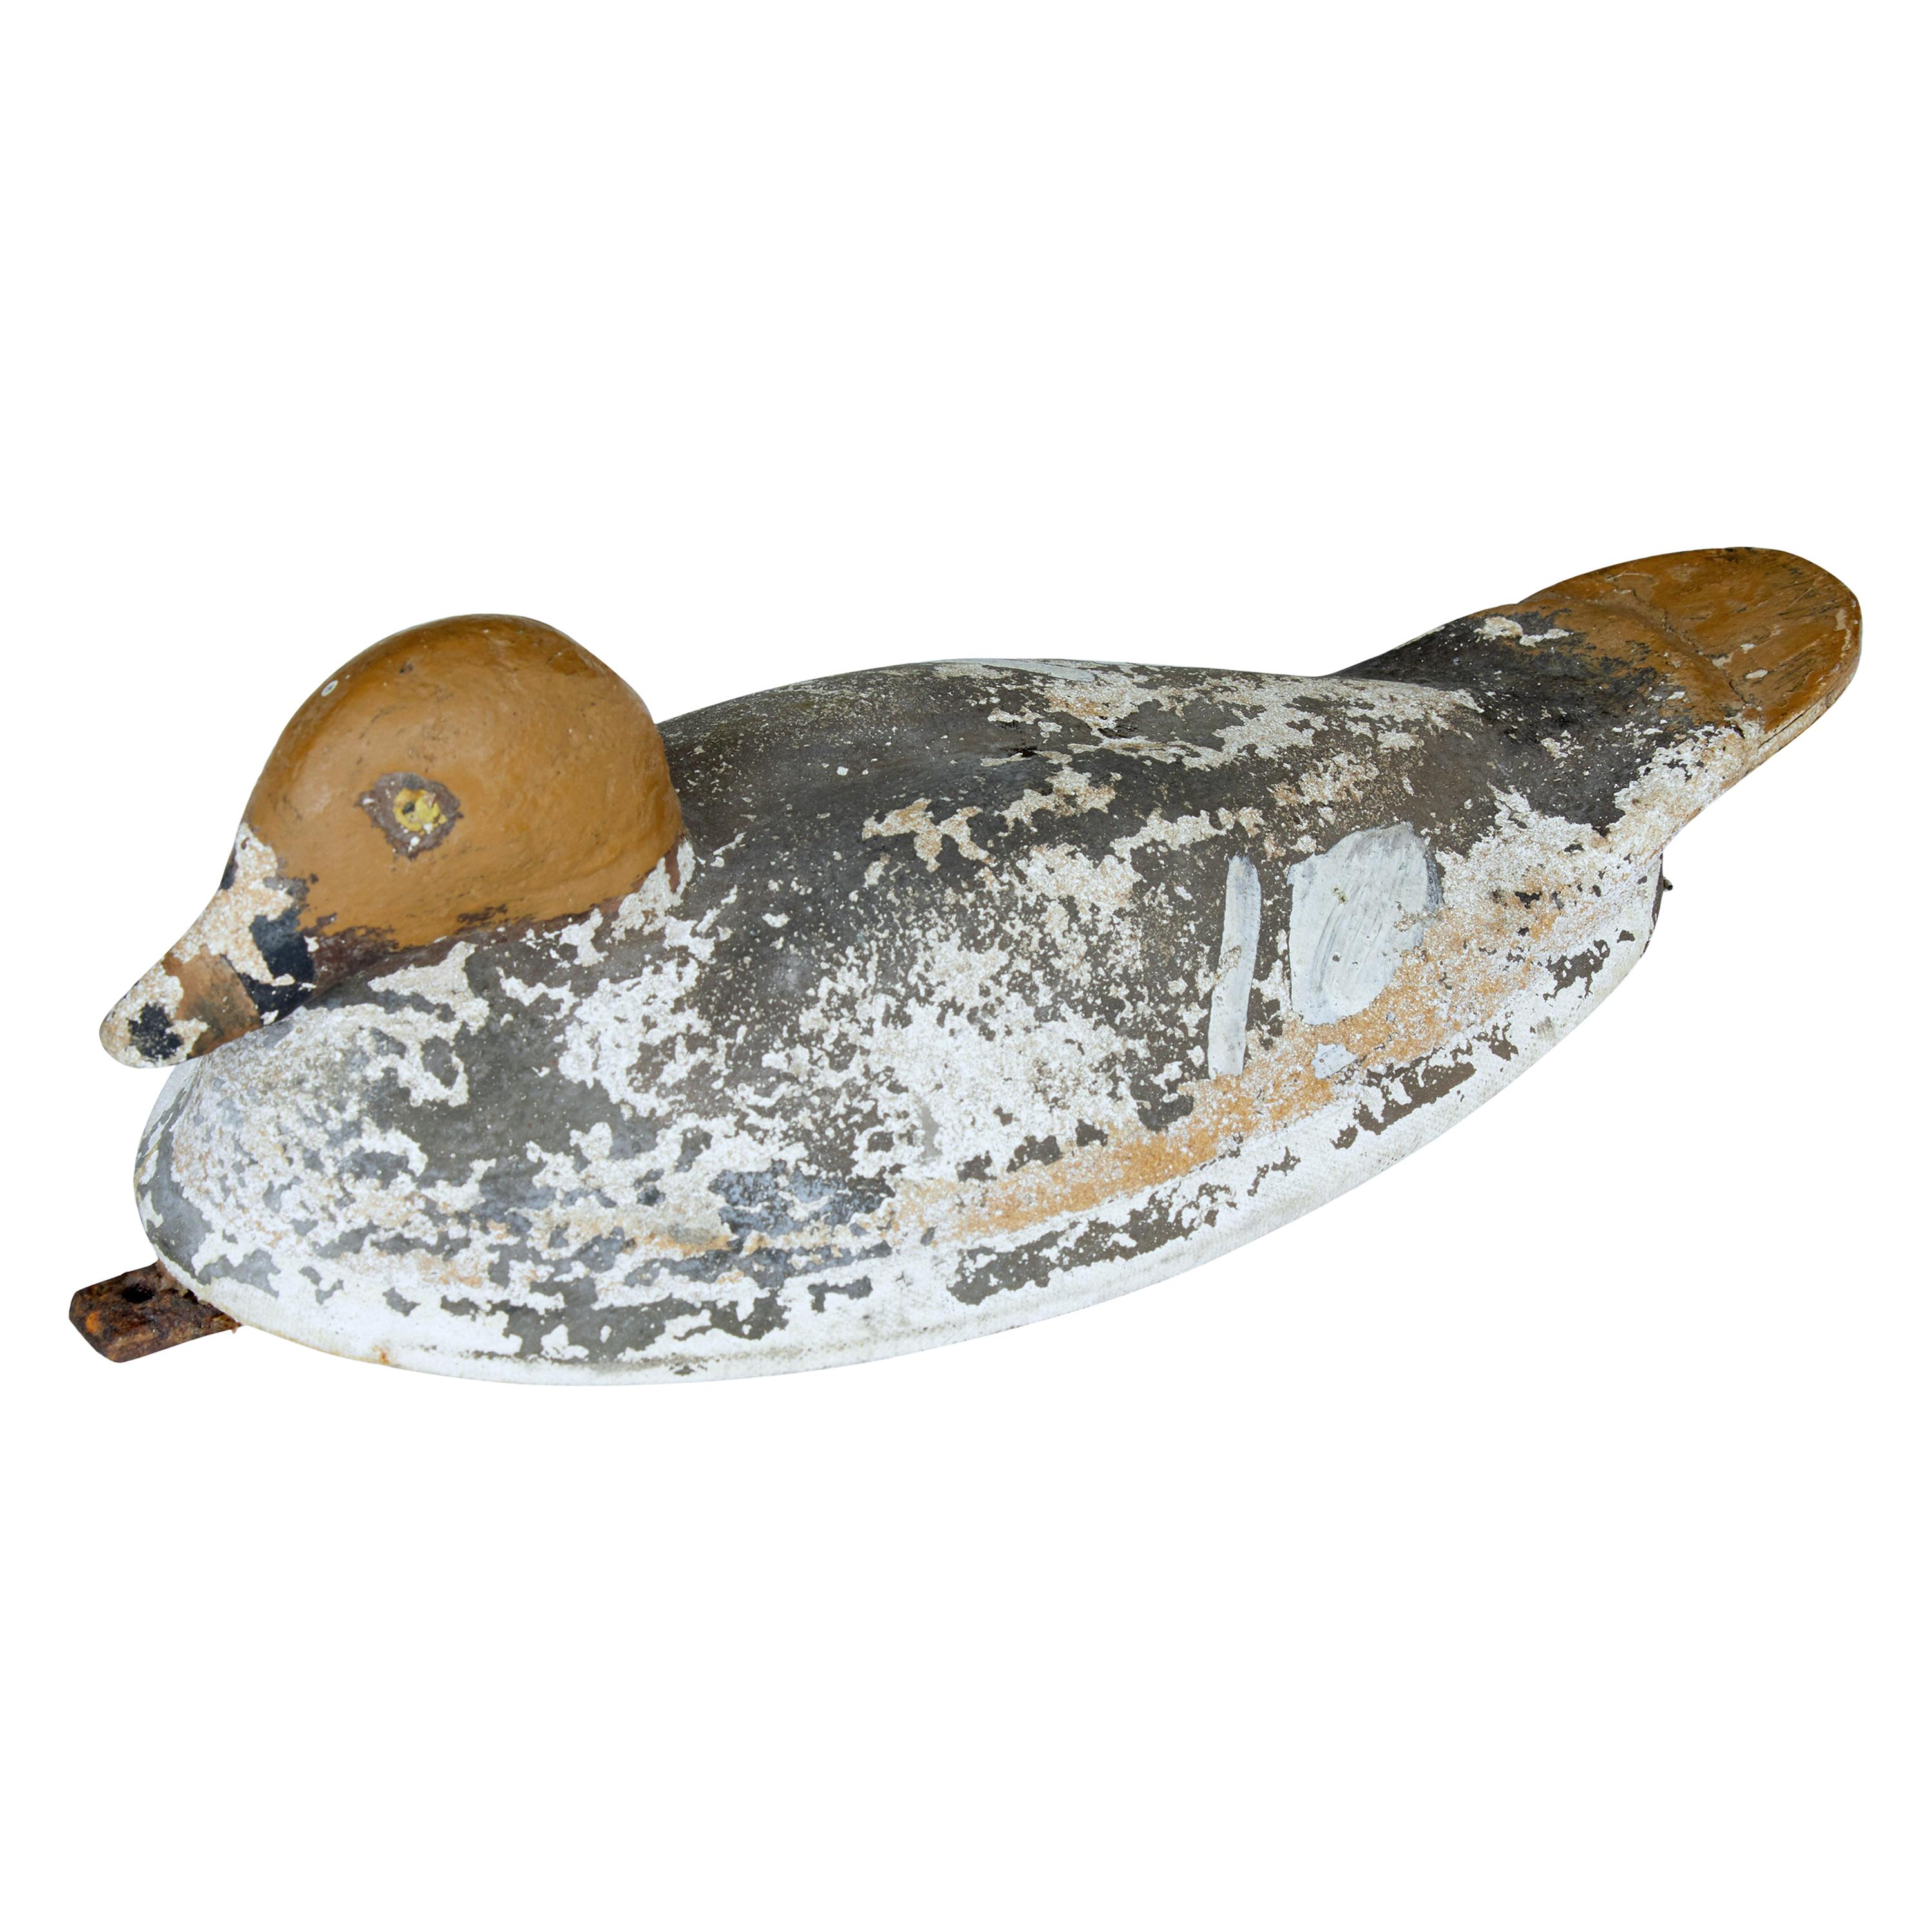 Early 20th Century Hand Painted Decoy Duck